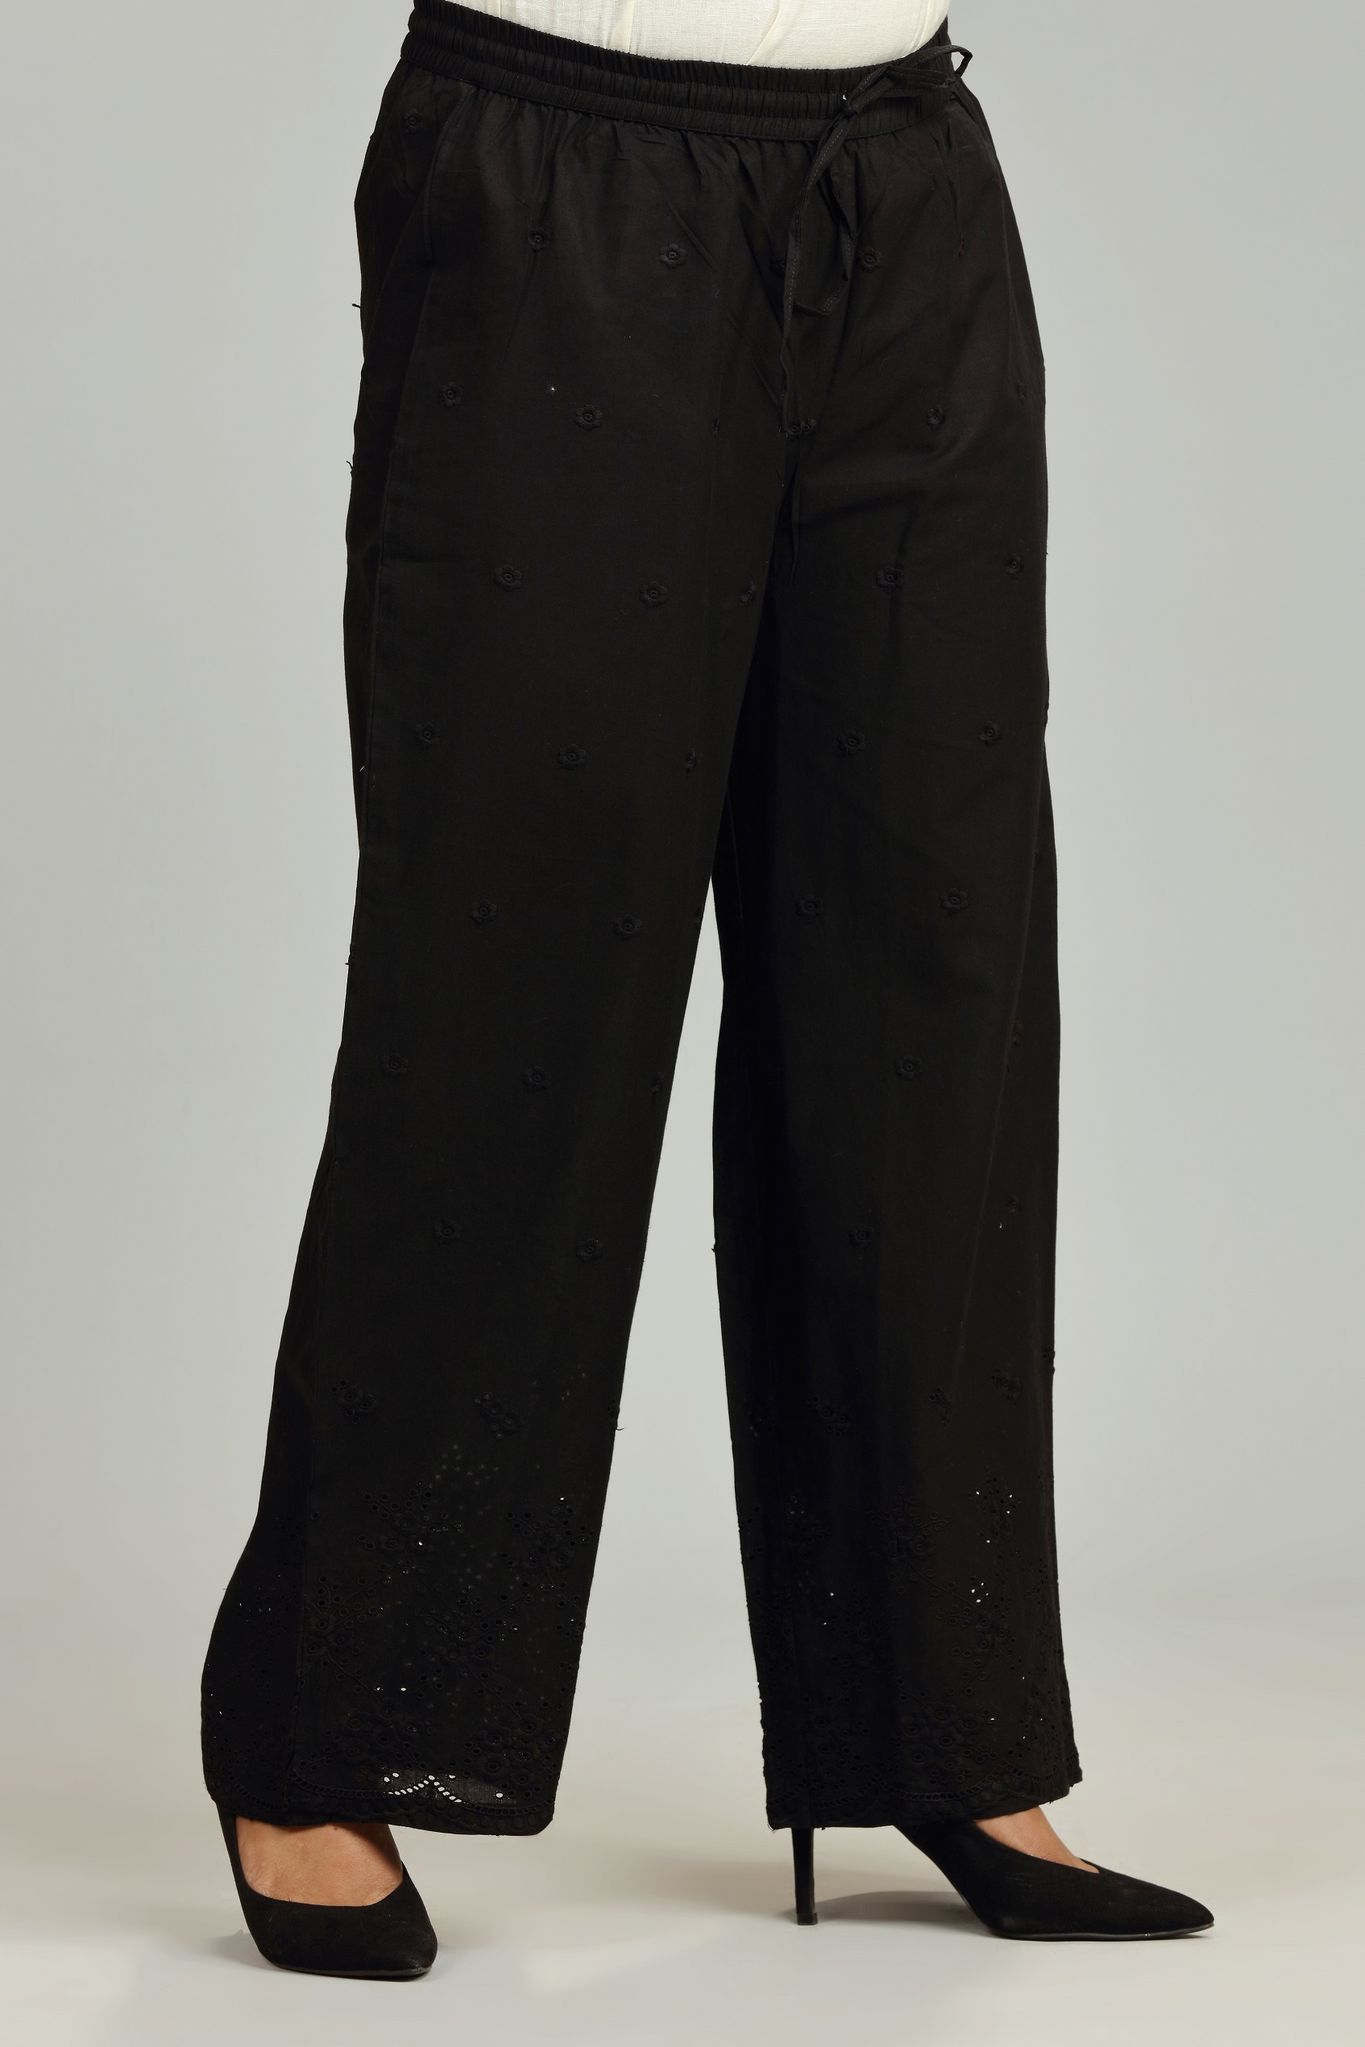 Madhu Black Cotton Embroidered Pant